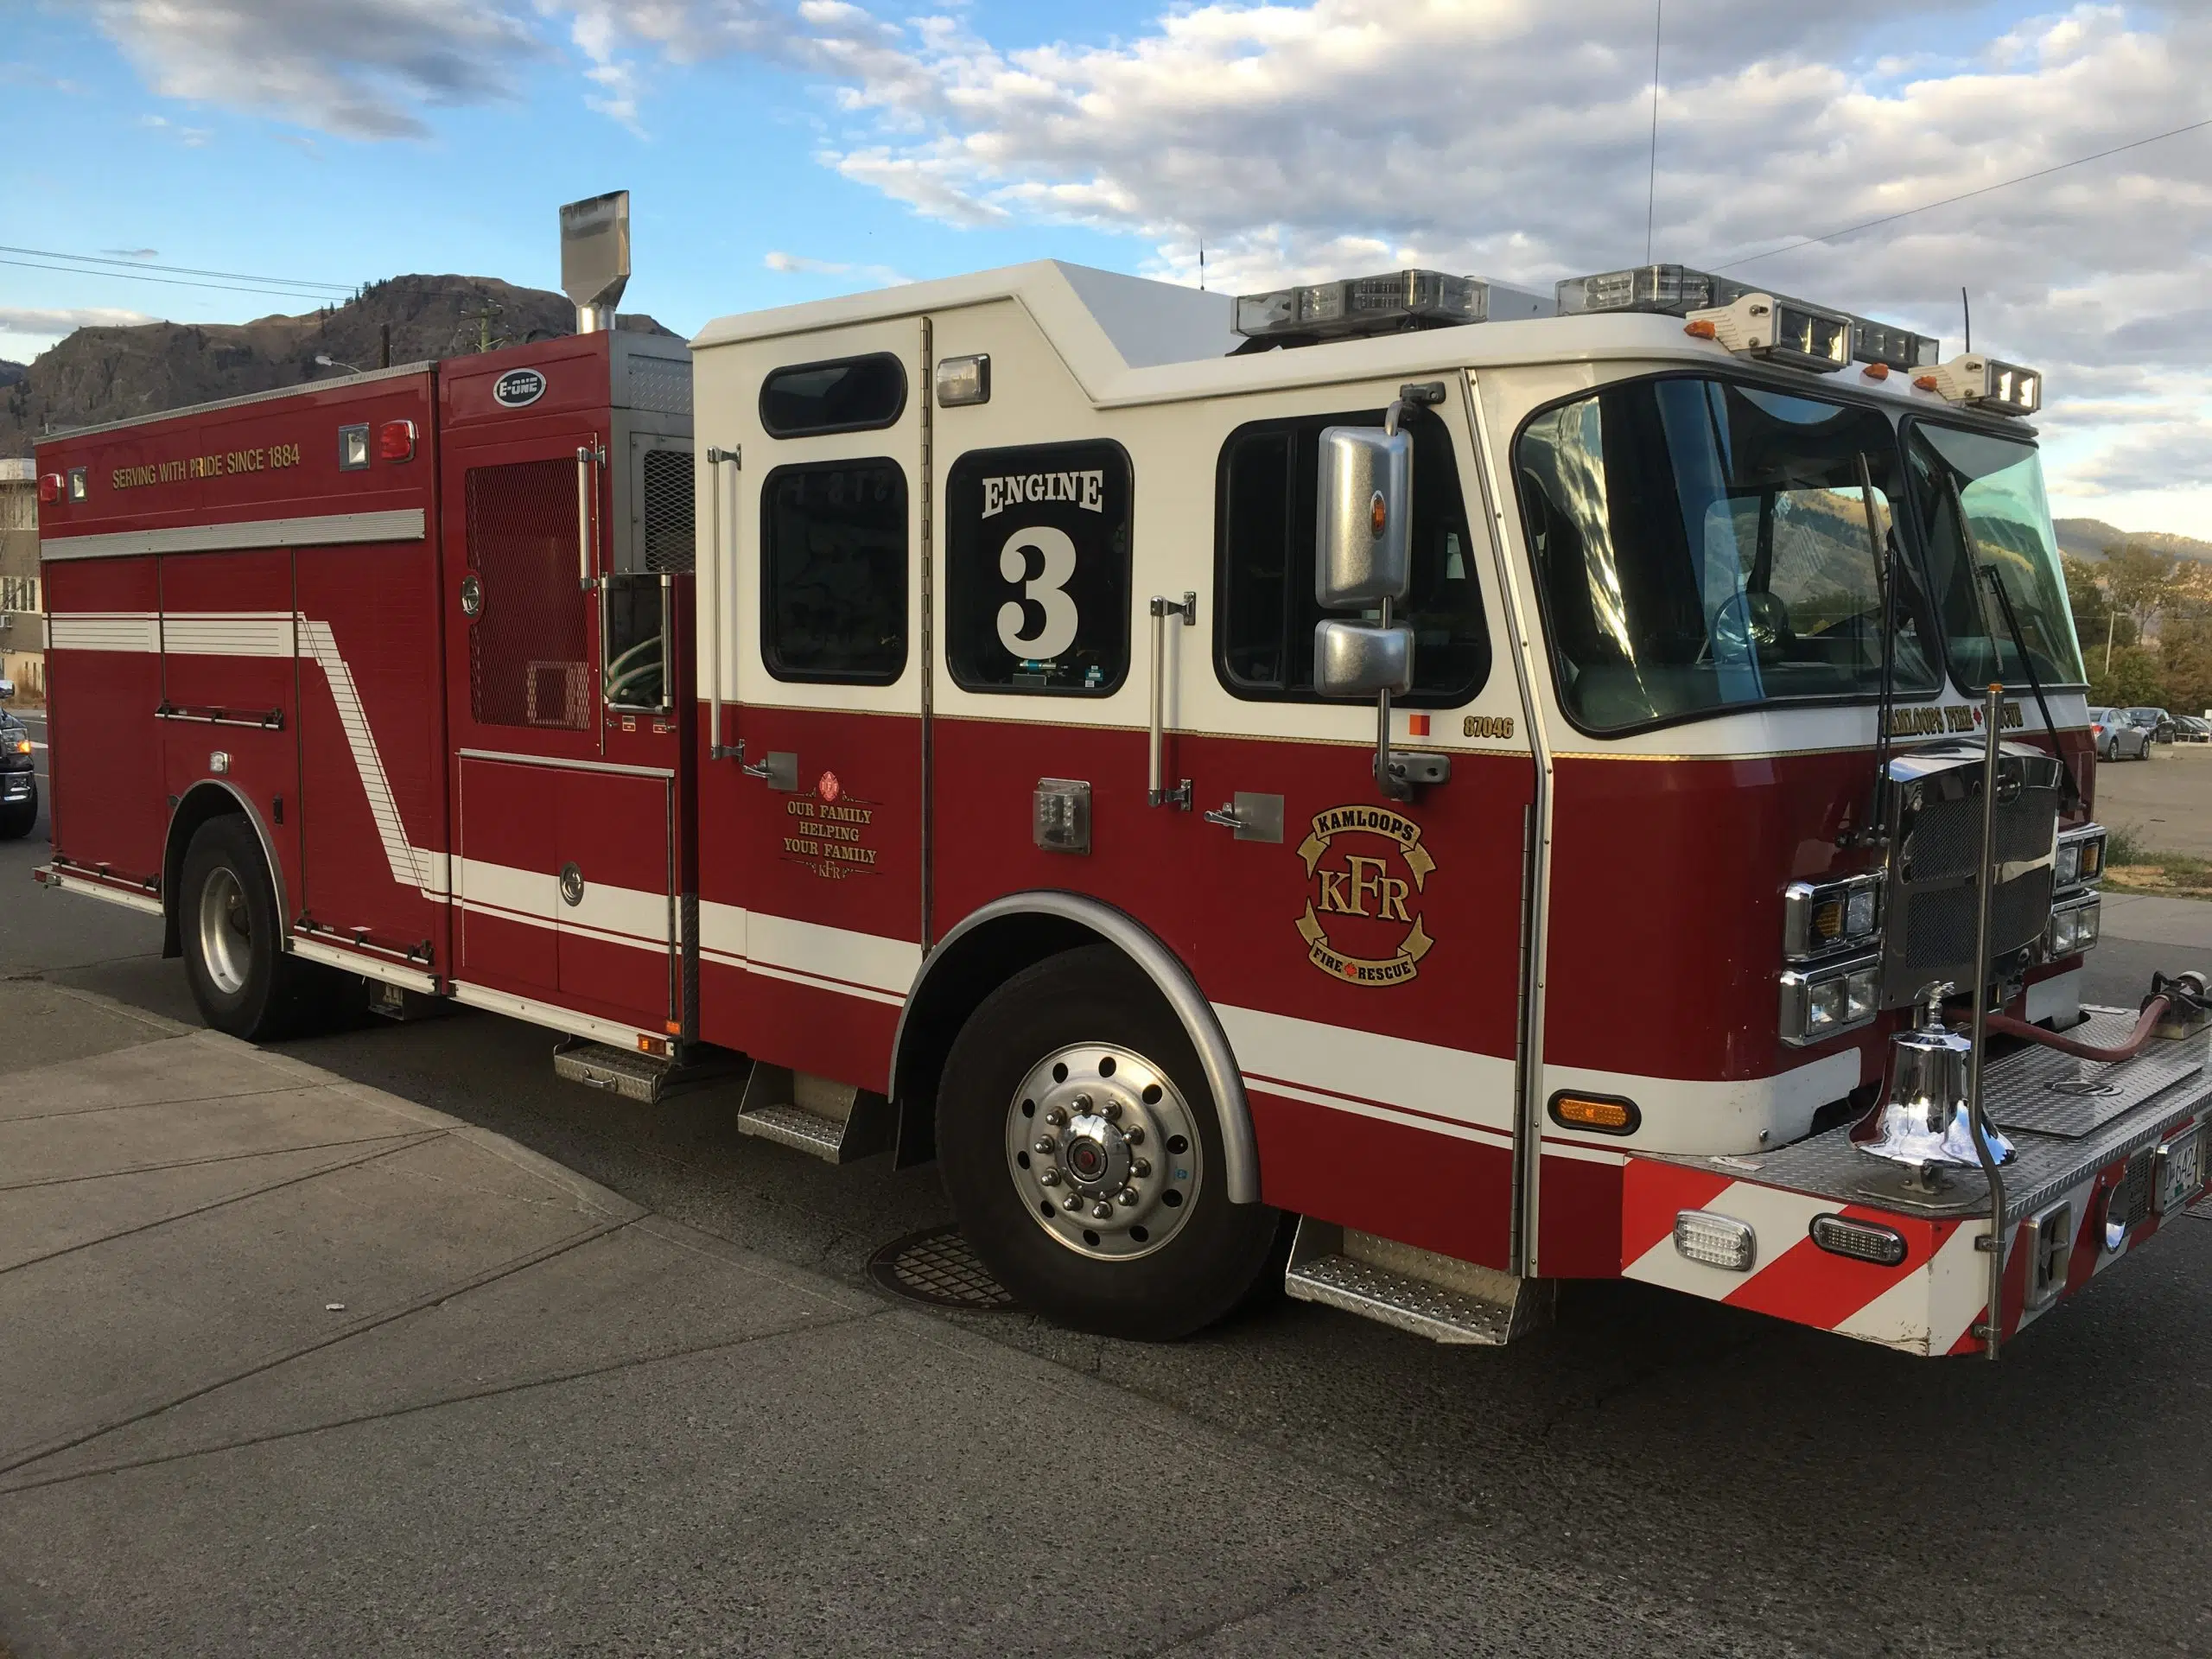 Kamloops Firefighters tackled an early morning fire